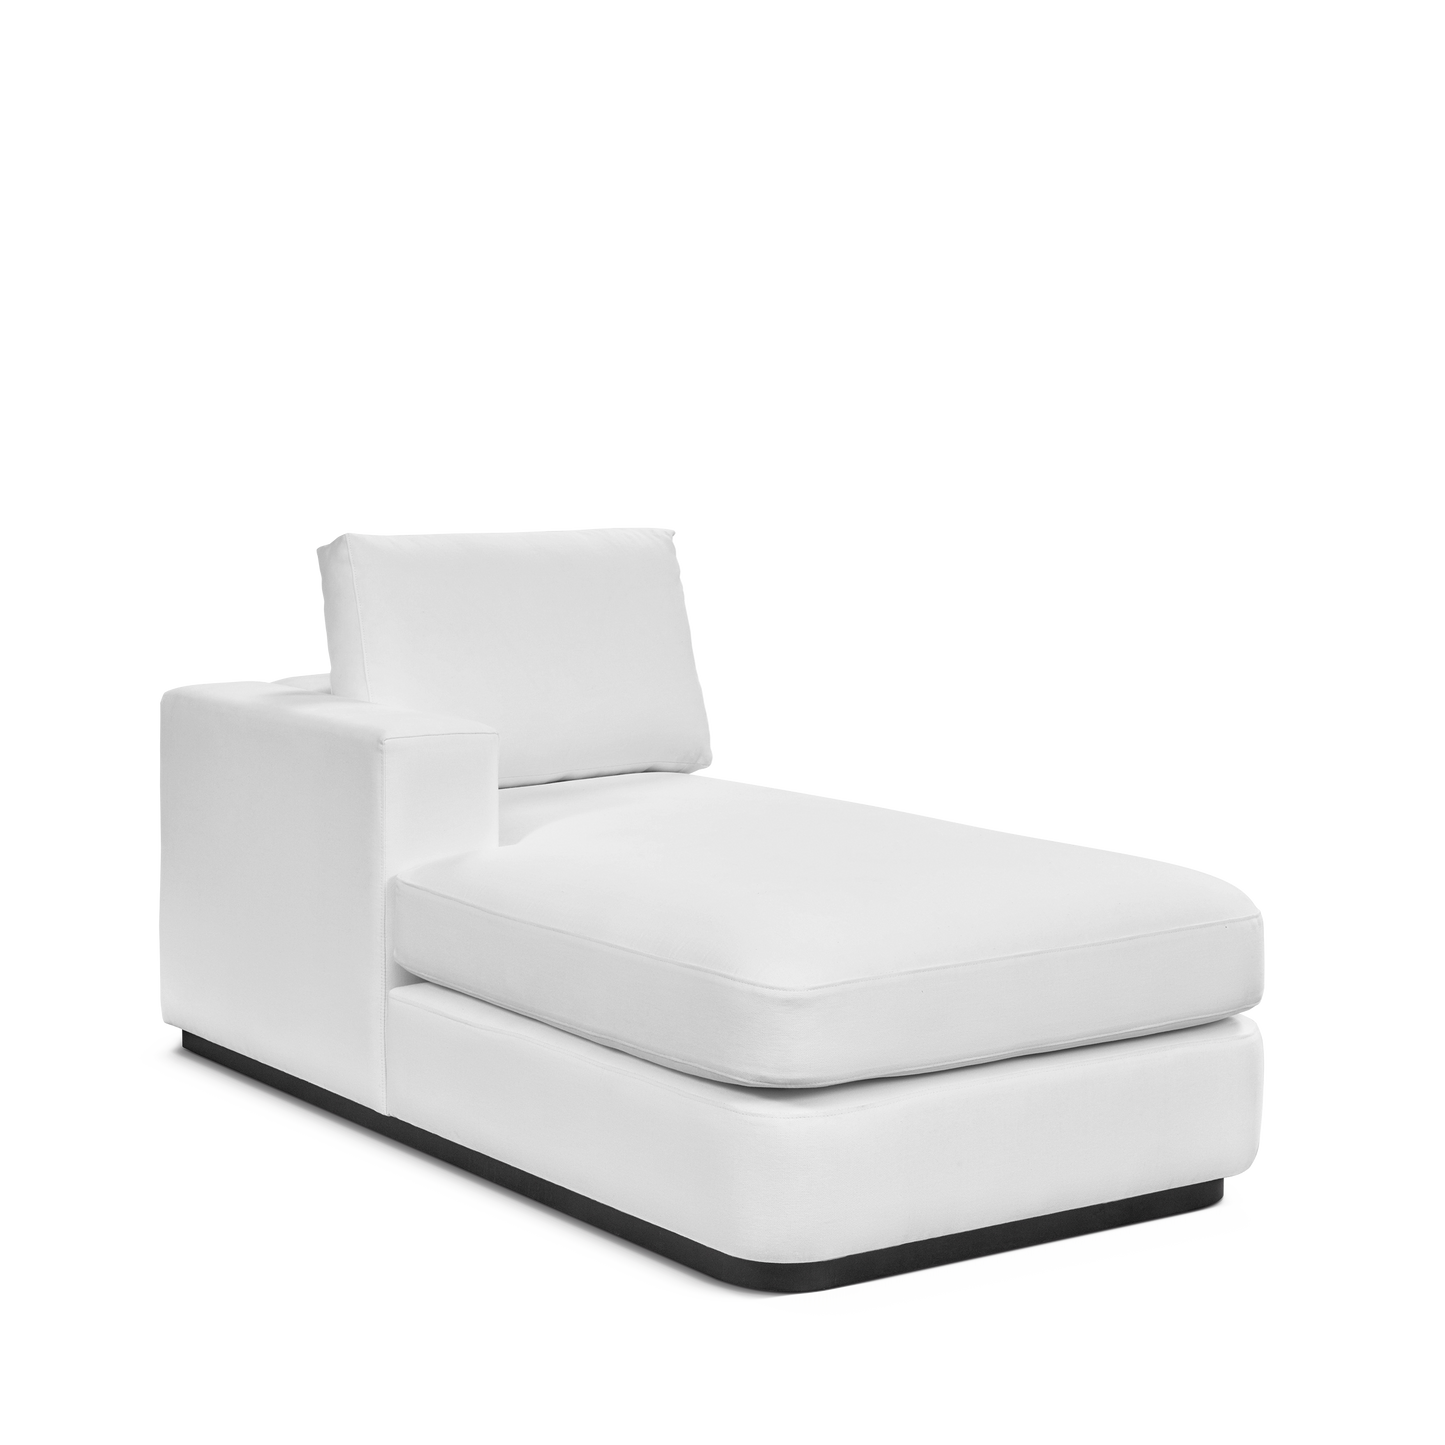 ATLAS 90 Lounge Bed arm rest left with linara white textile 